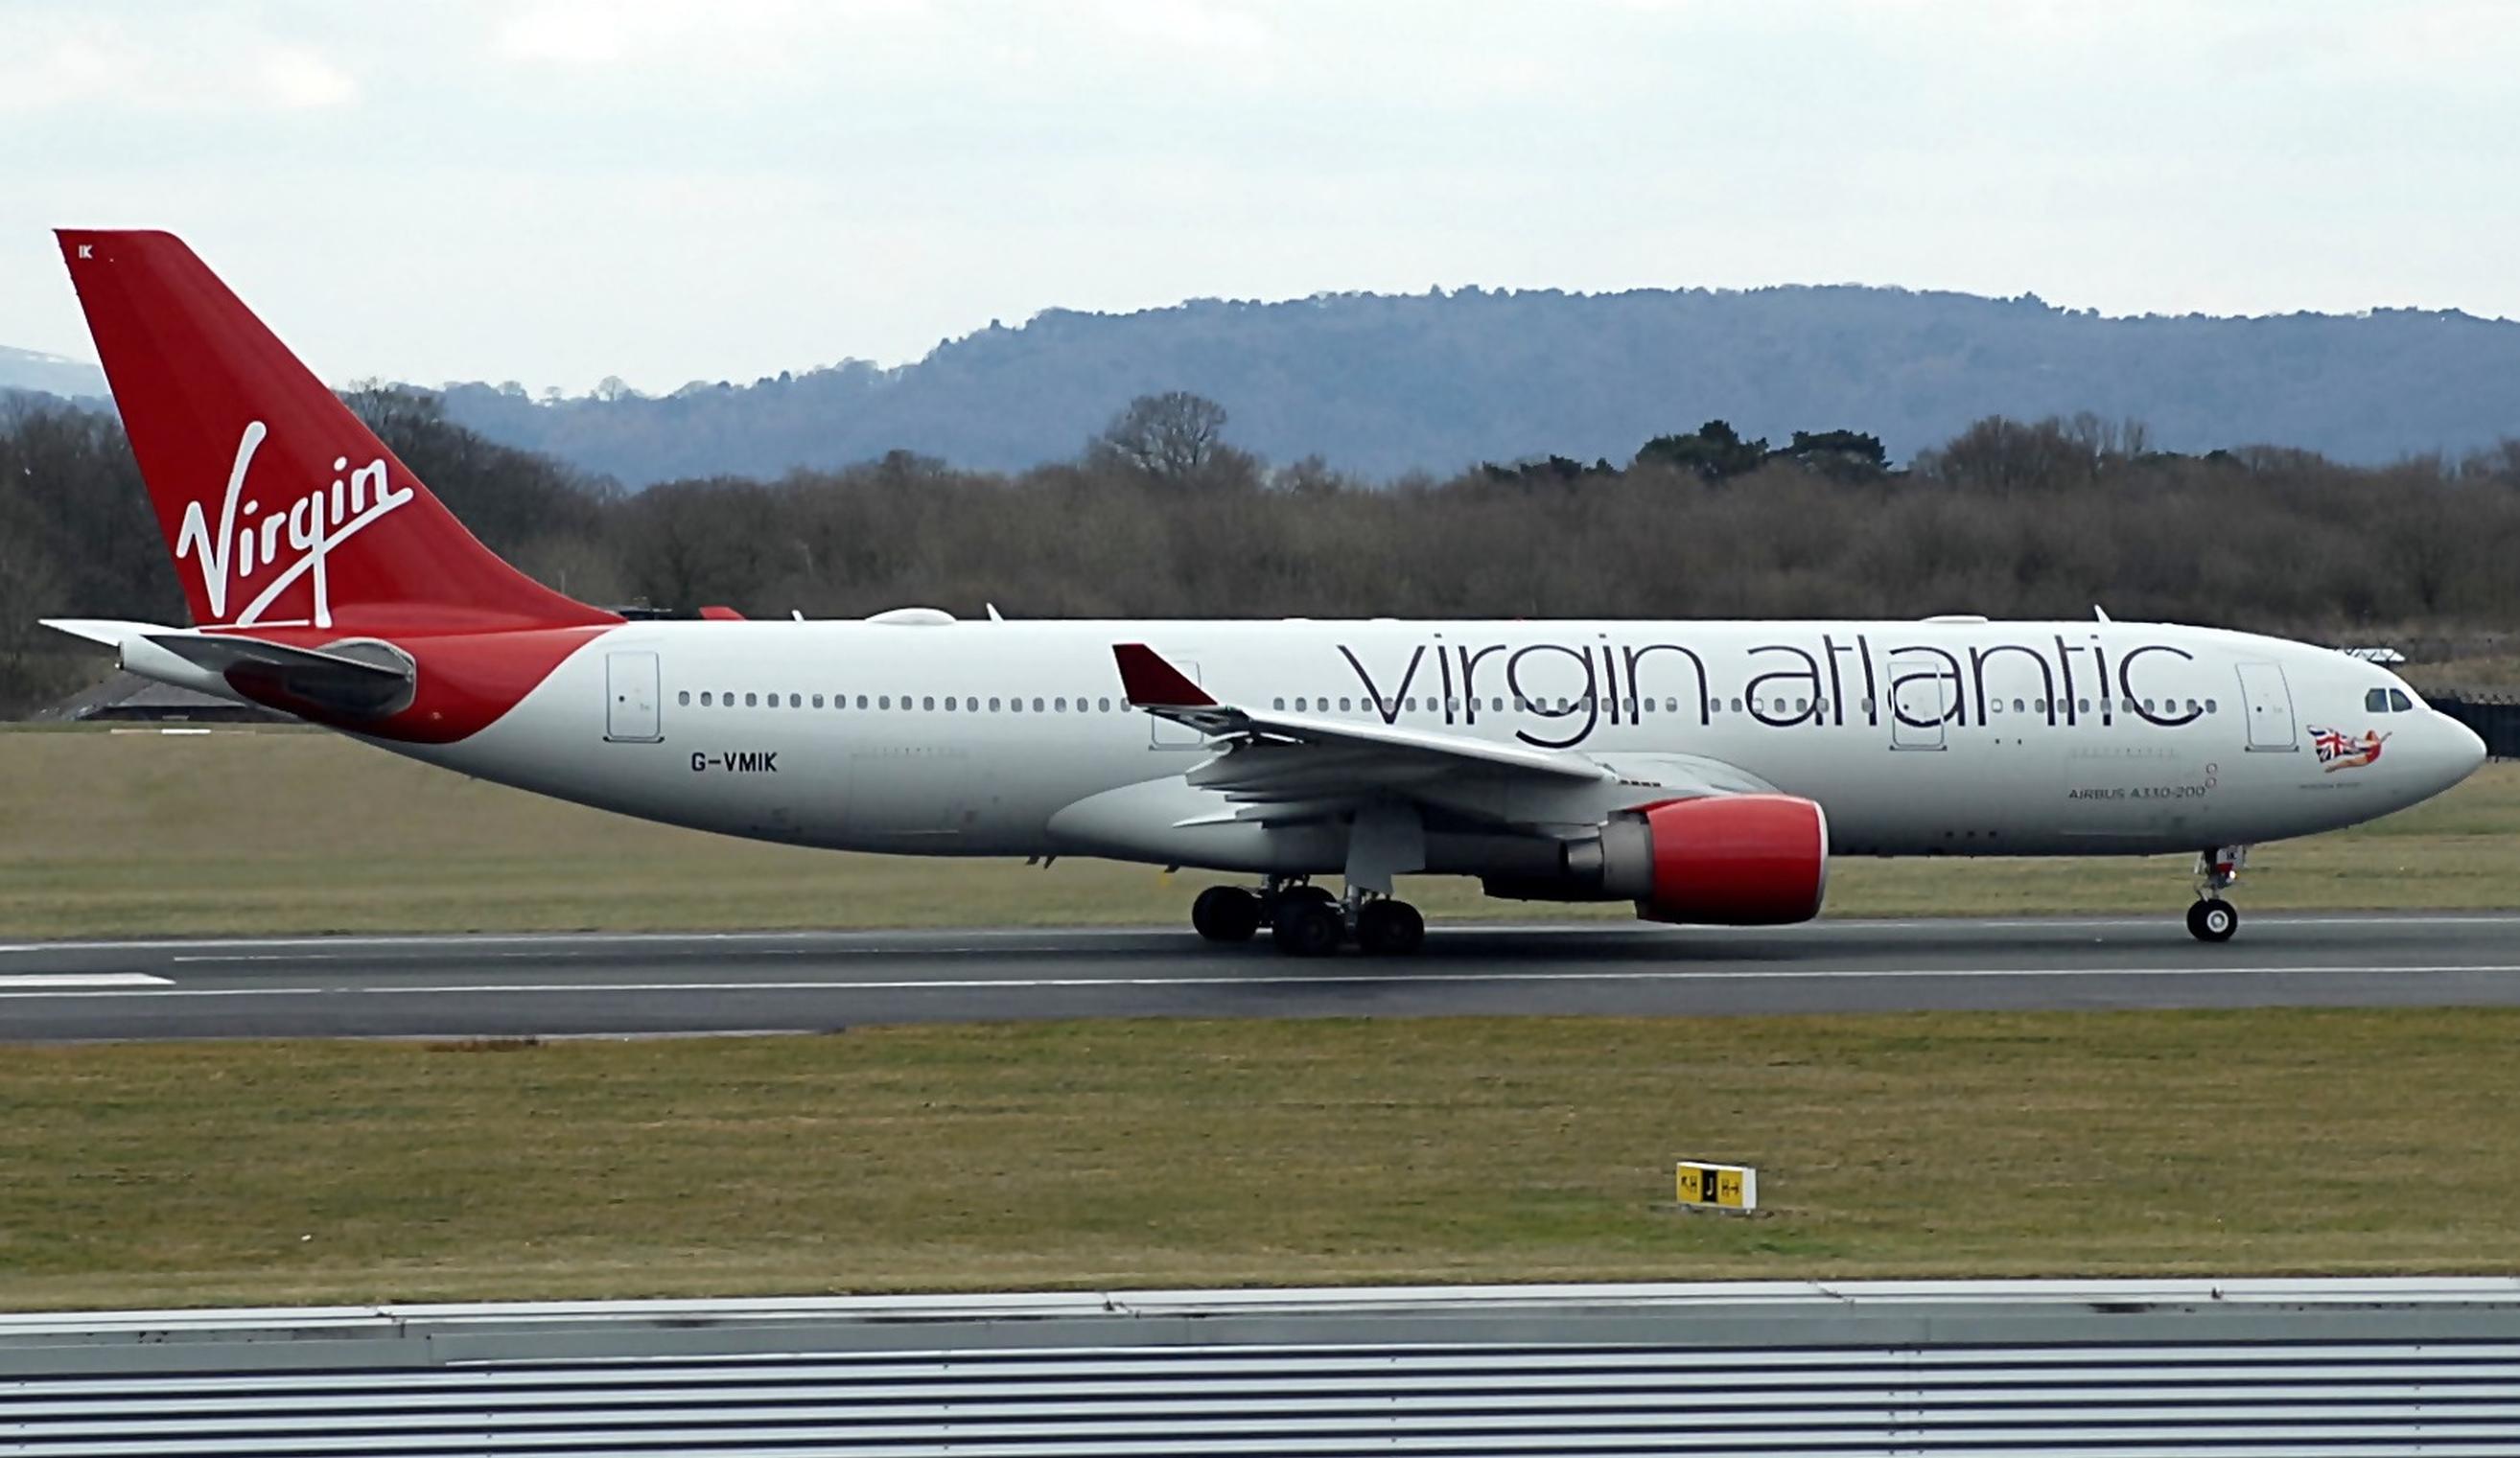 Virgin Atlantic is planning to reduce the size of its aircraft fleet and workforce